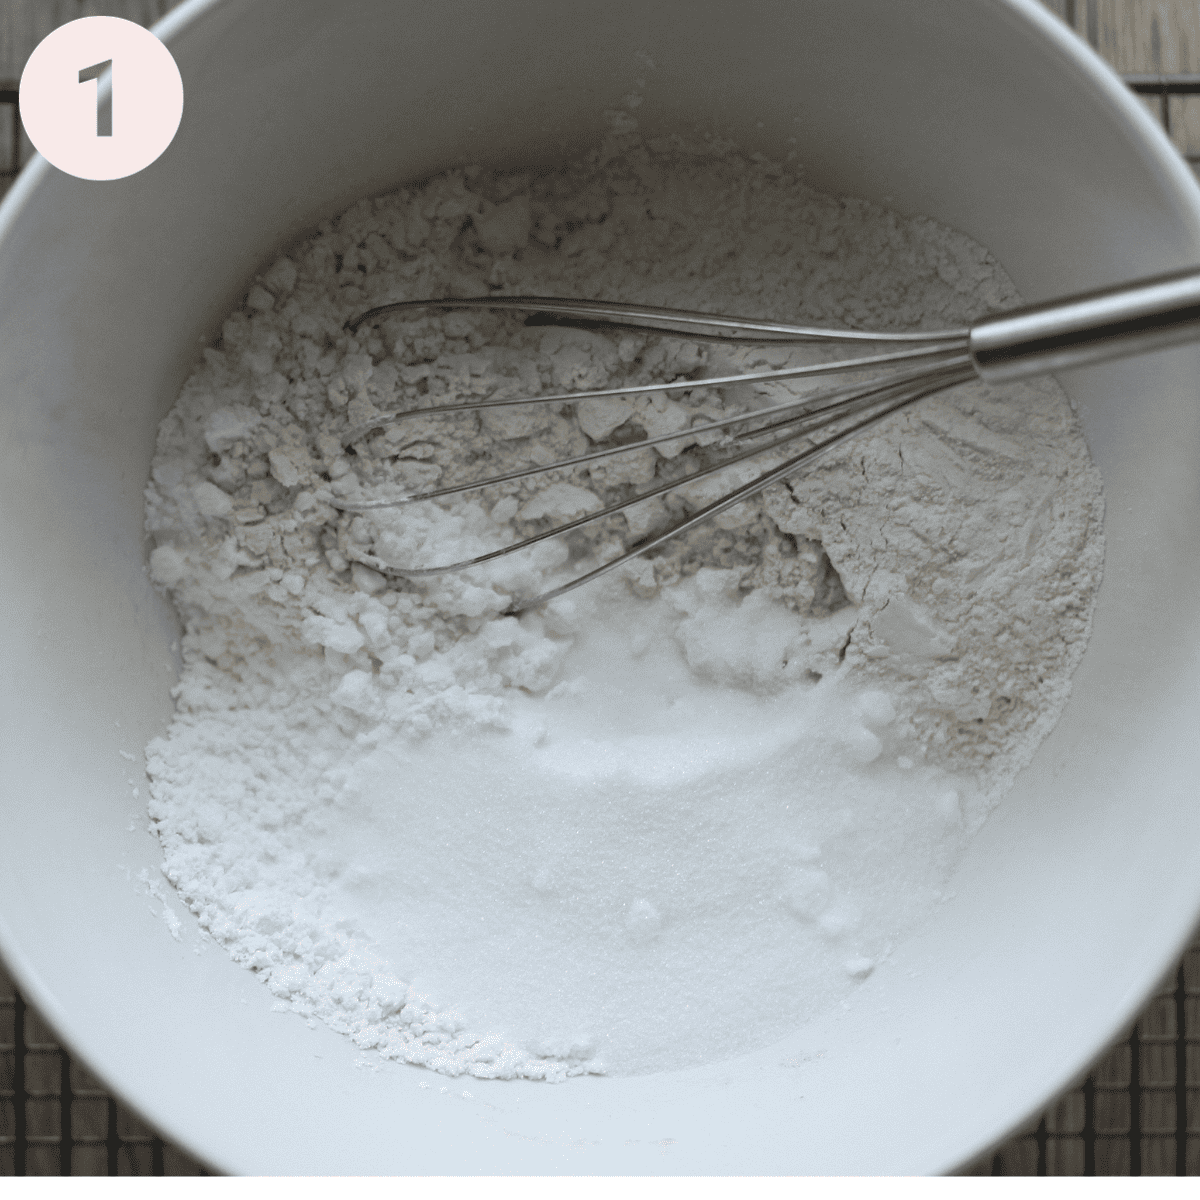 Whisking flour and cornflour for waffles.